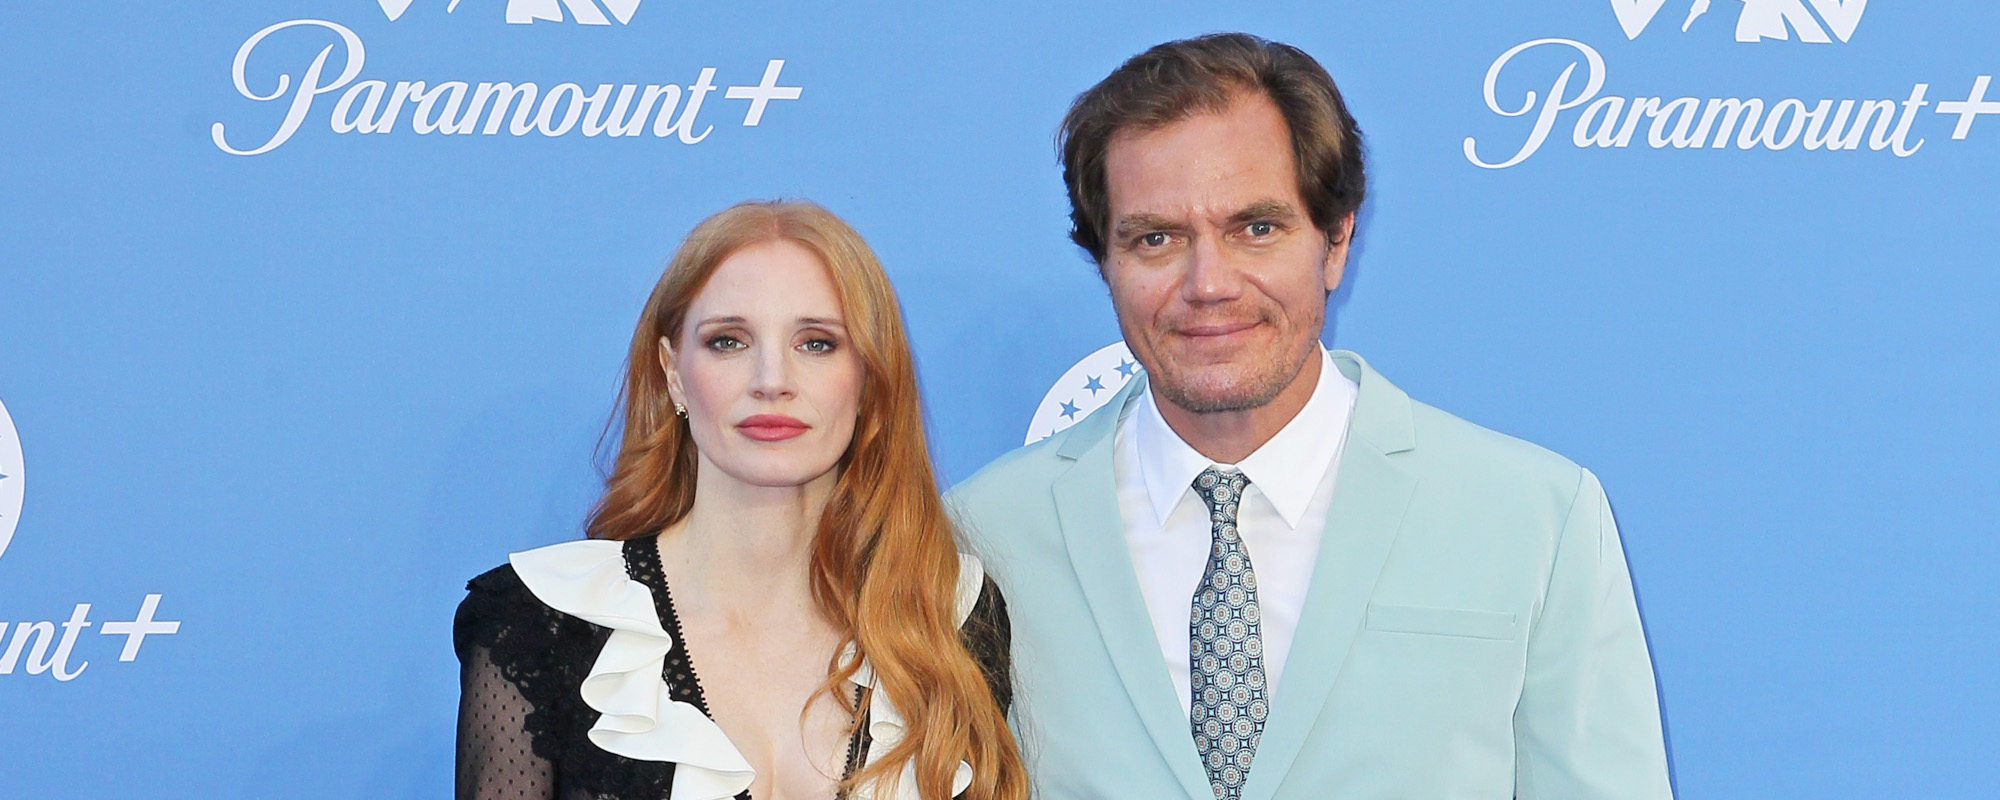 New ‘George & Tammy’ Series Set for Paramount+ Starring Jessica Chastain and Michael Shannon